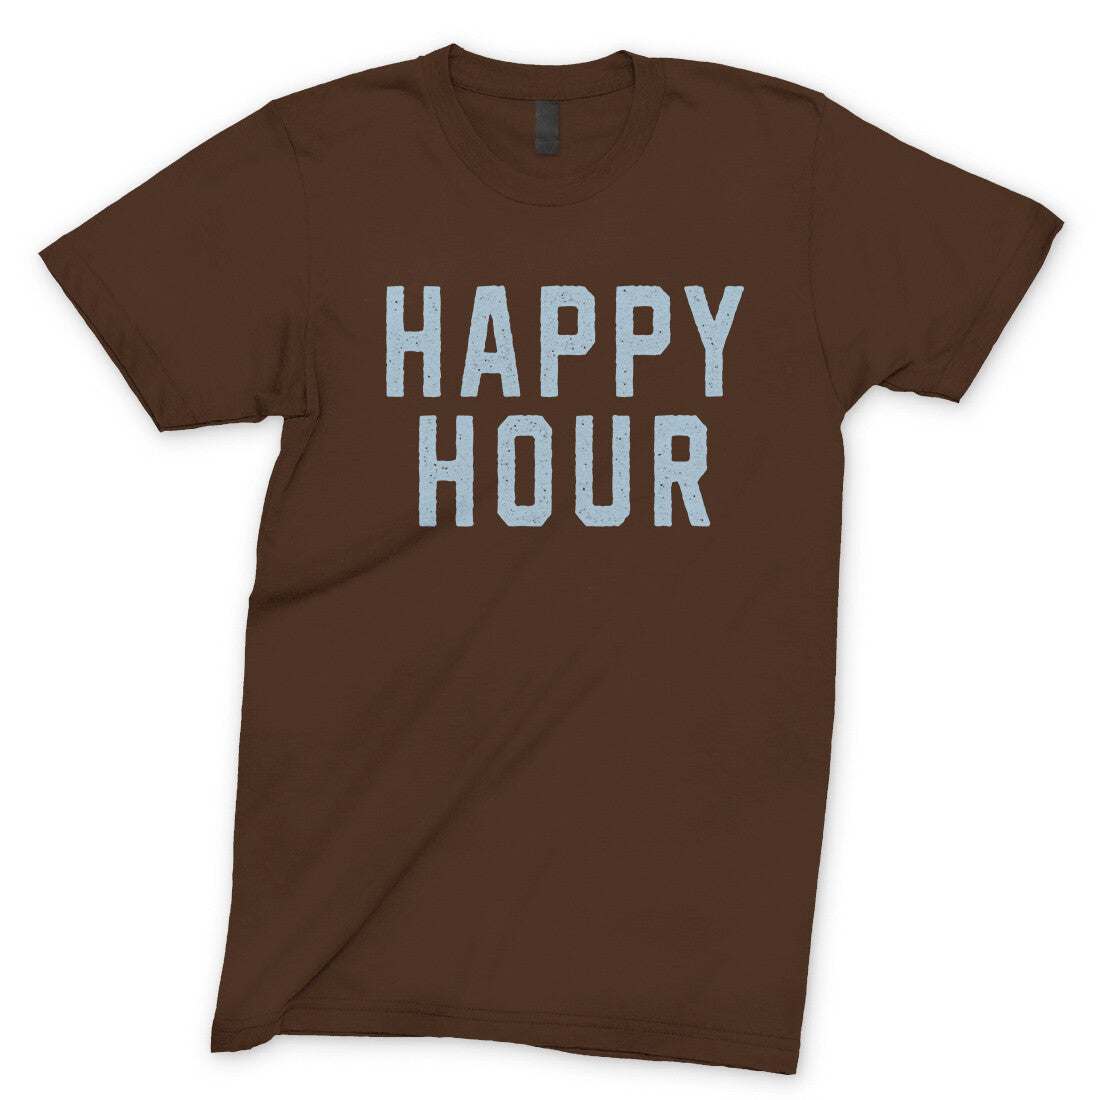 Happy Hour in Dark Chocolate Color